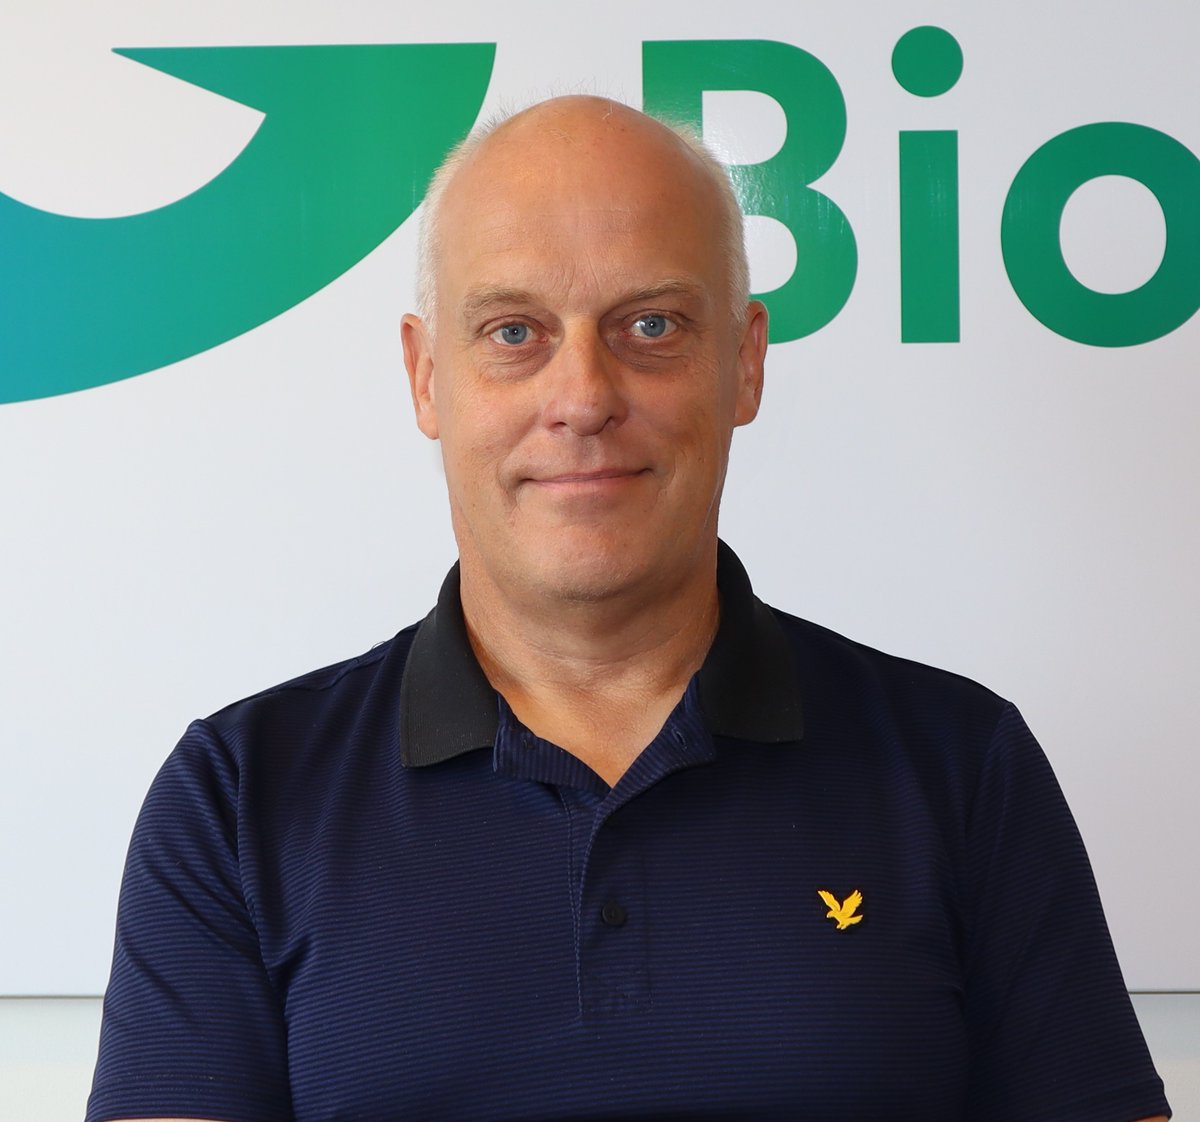 GAIA BIOMATERIALS ADDS GLOBAL SALES MANAGER TO THE ROSTER - WELCOME NIKLAS ROSENKVIST mailchi.mp/50eab48a5ba1/g…